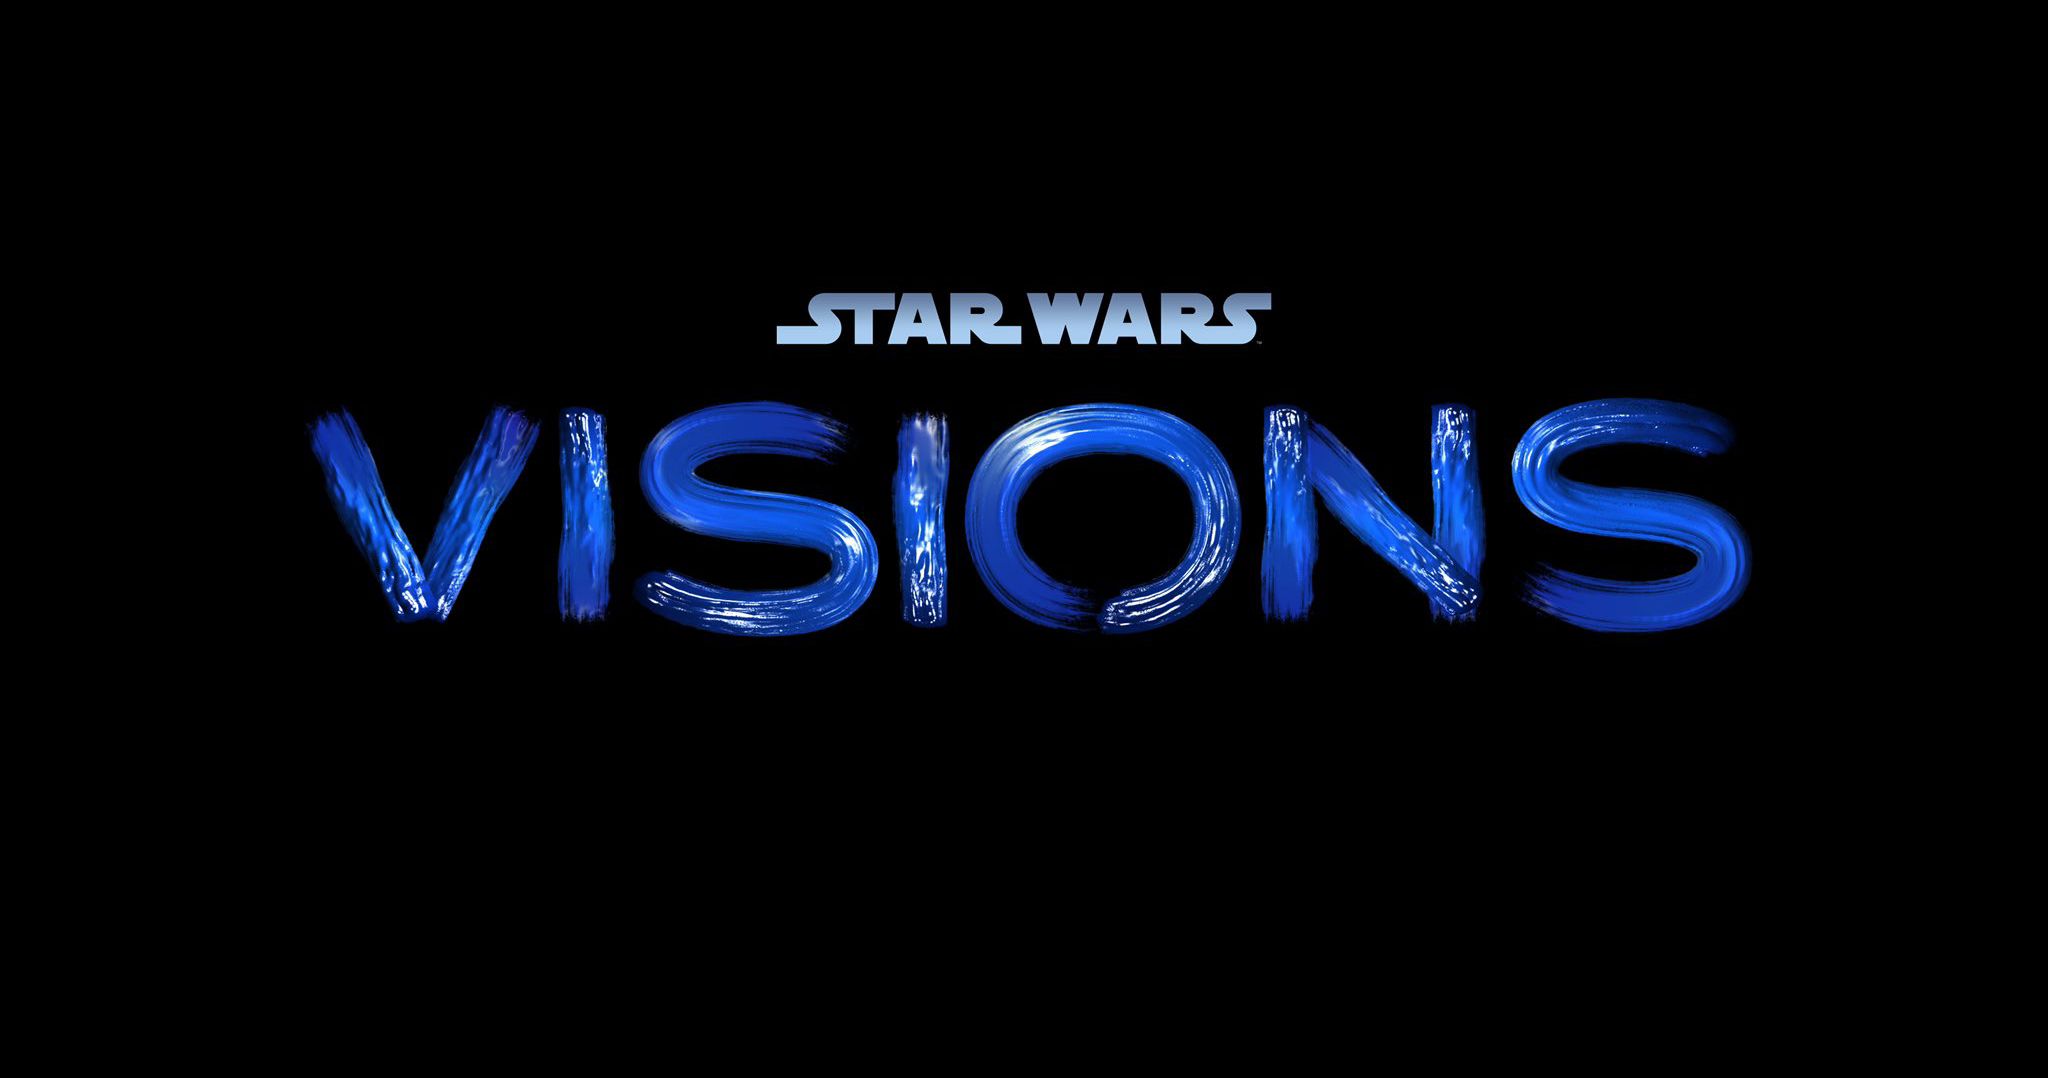 Visions Anthology Will Celebrate Star Wars with New Animated Shorts on Disney+